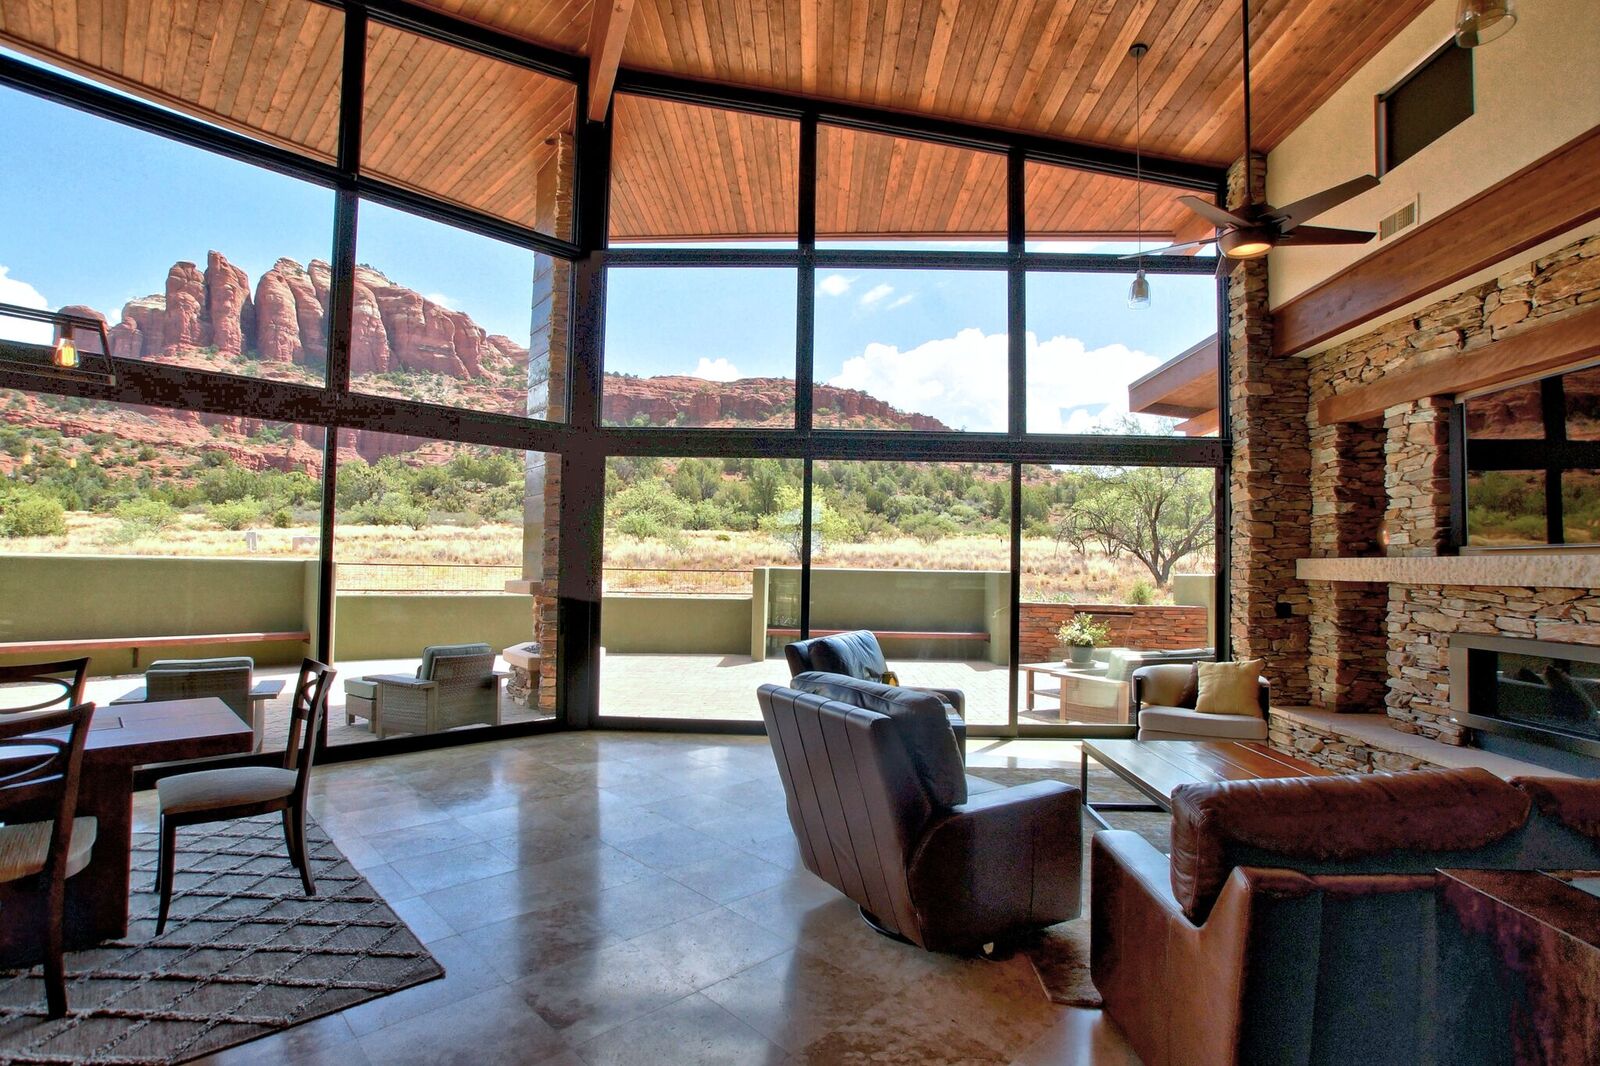 A living room with large windows and a mountain view.